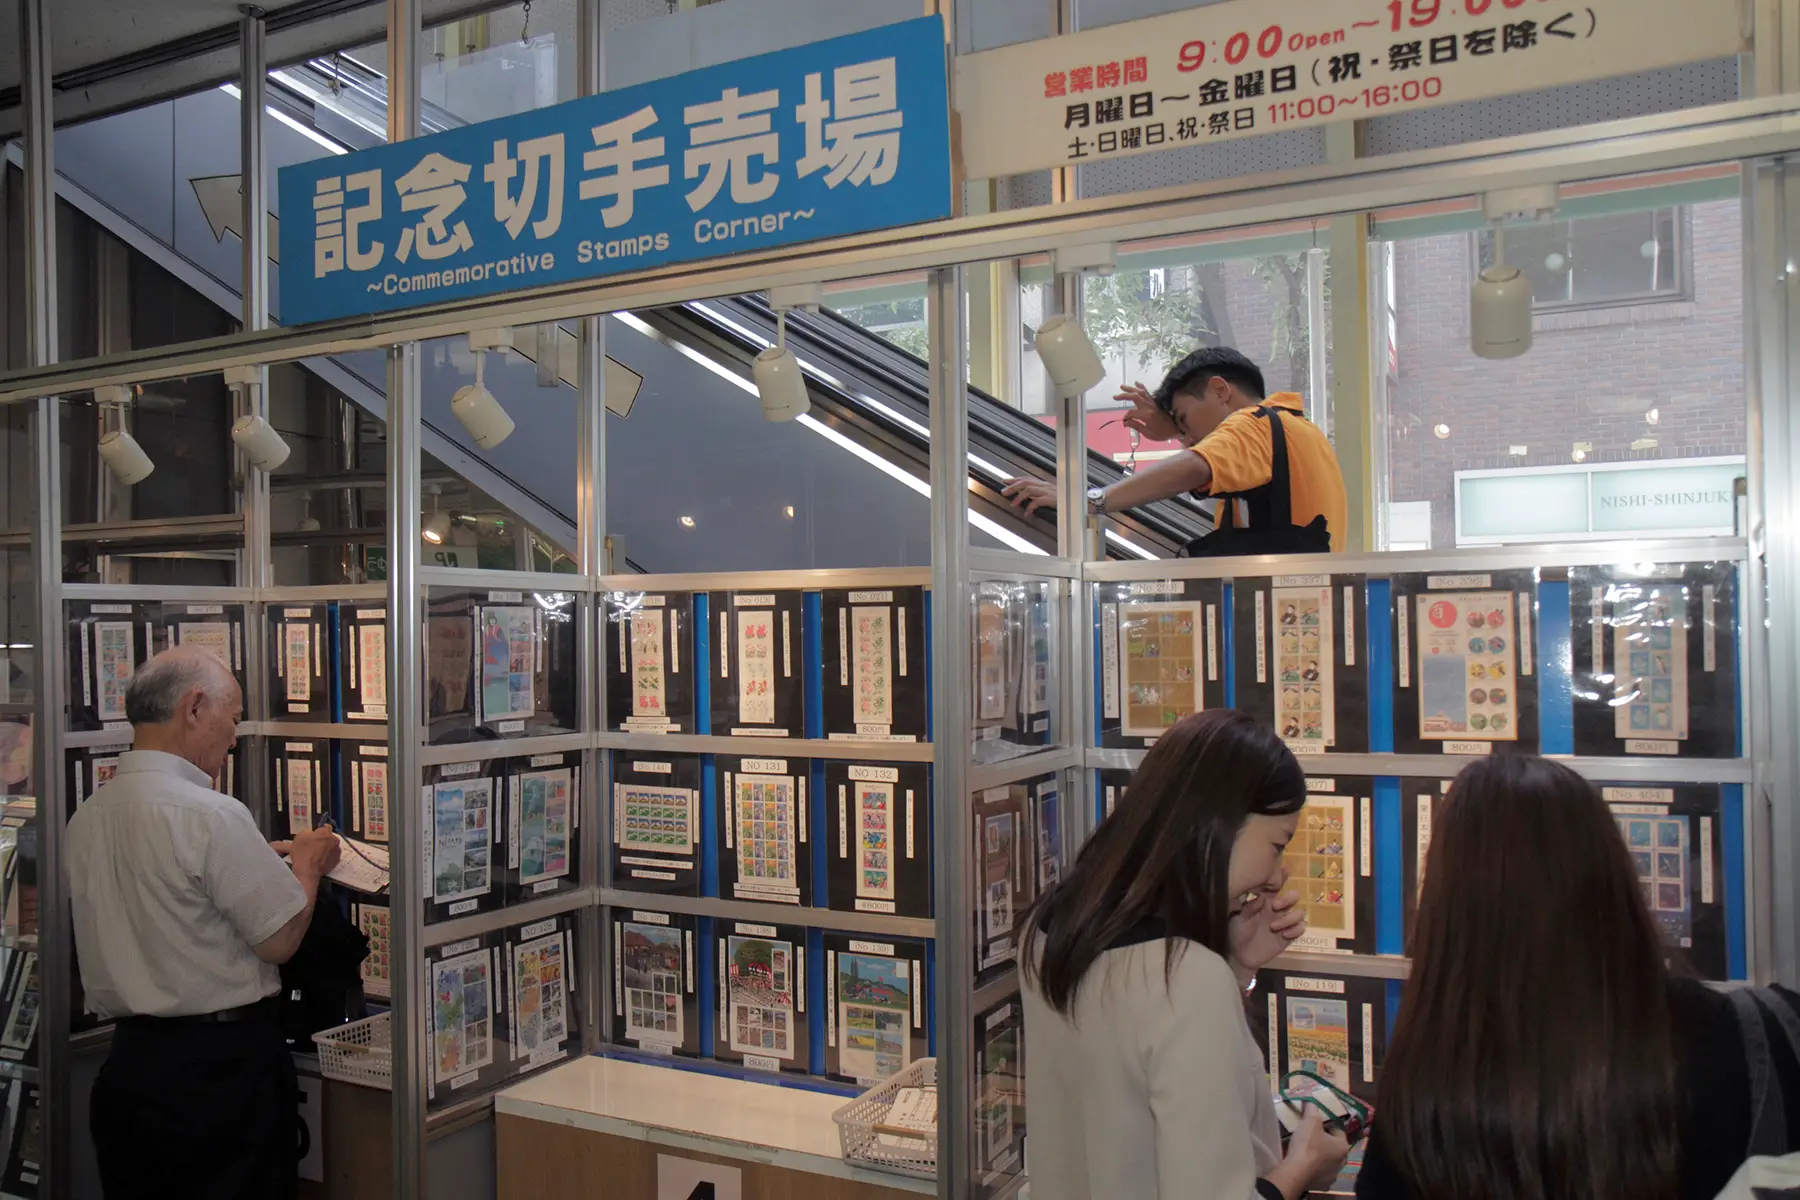 People looking at a display of commemorative stamps